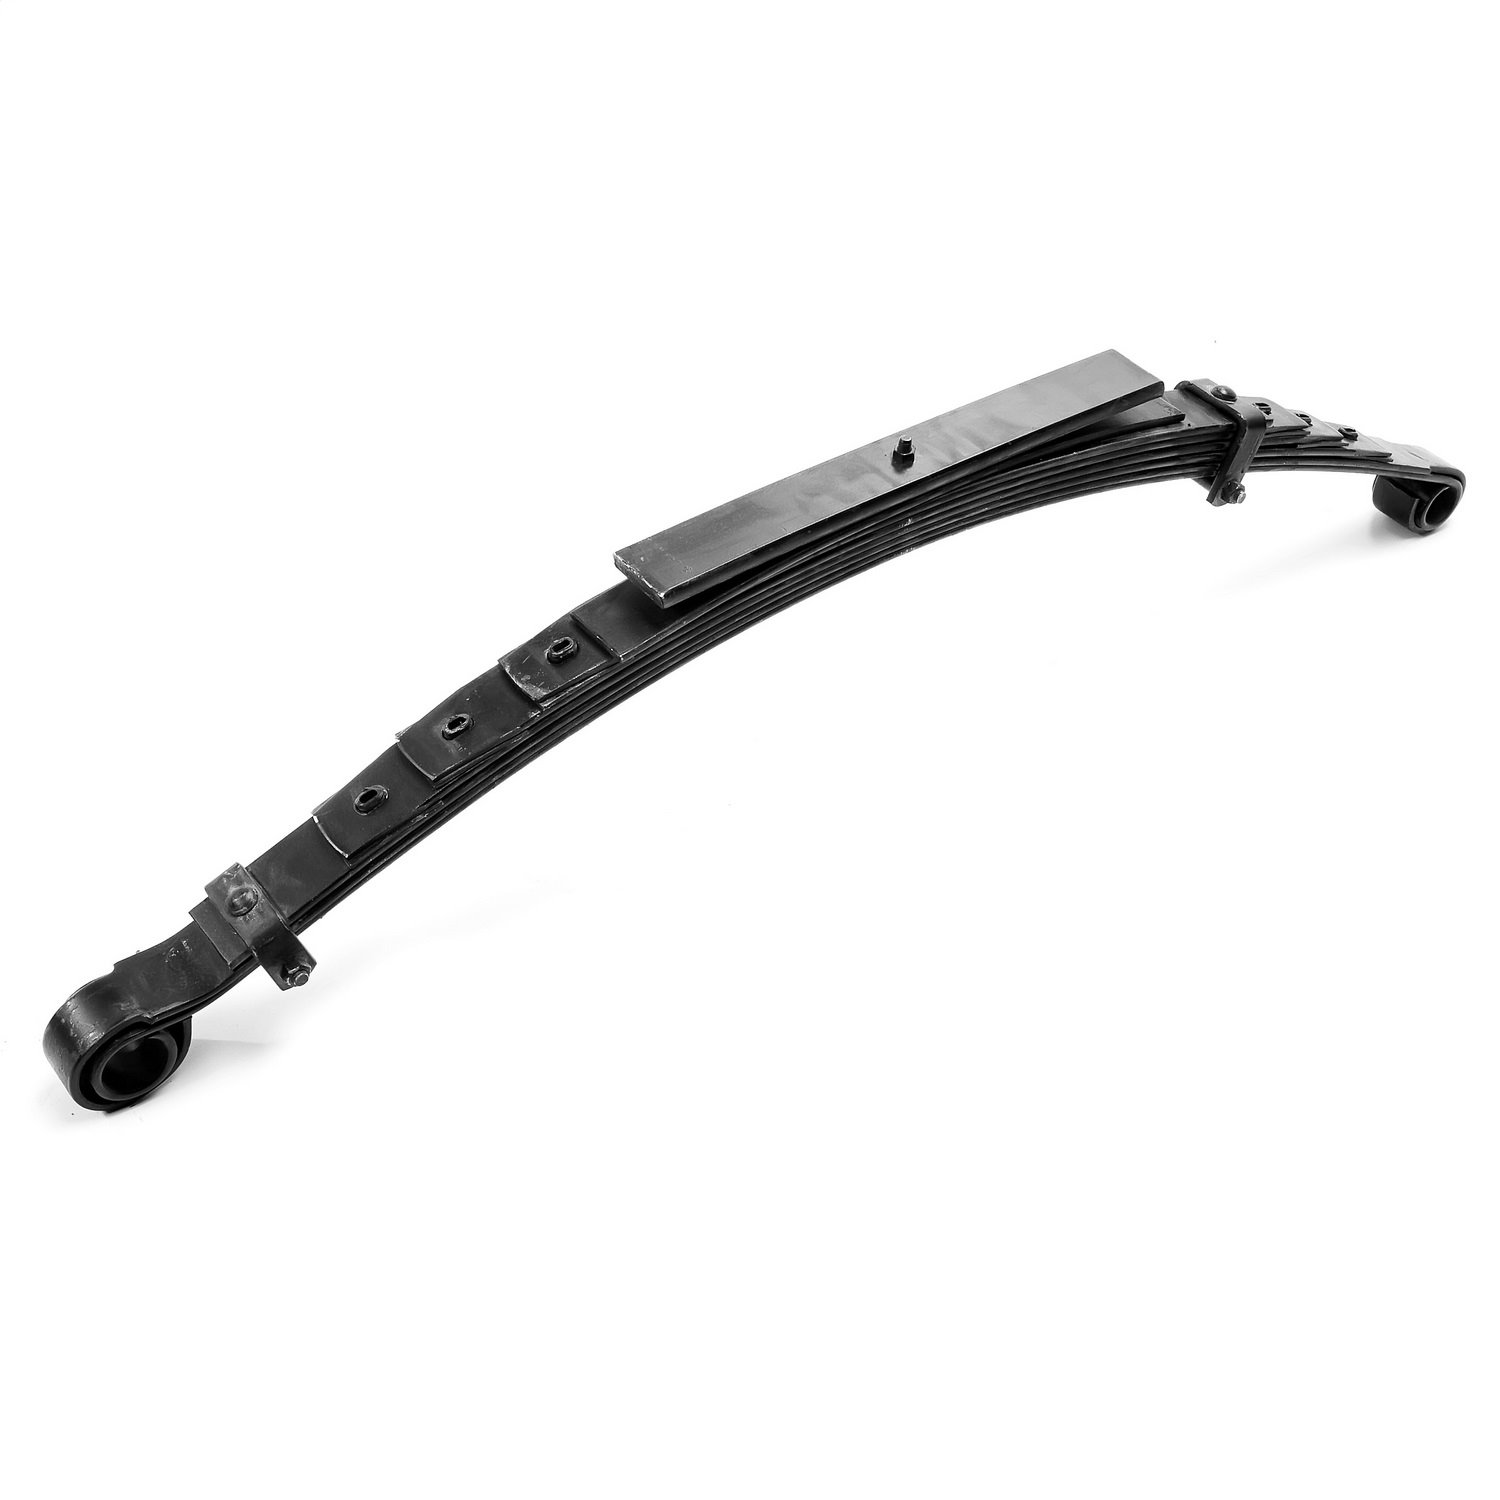 Stock replacement 8 leaf front spring from Omix-ADA, Fits 76-86 Jeep CJ7 and 81-86 CJ8 Left or right side.